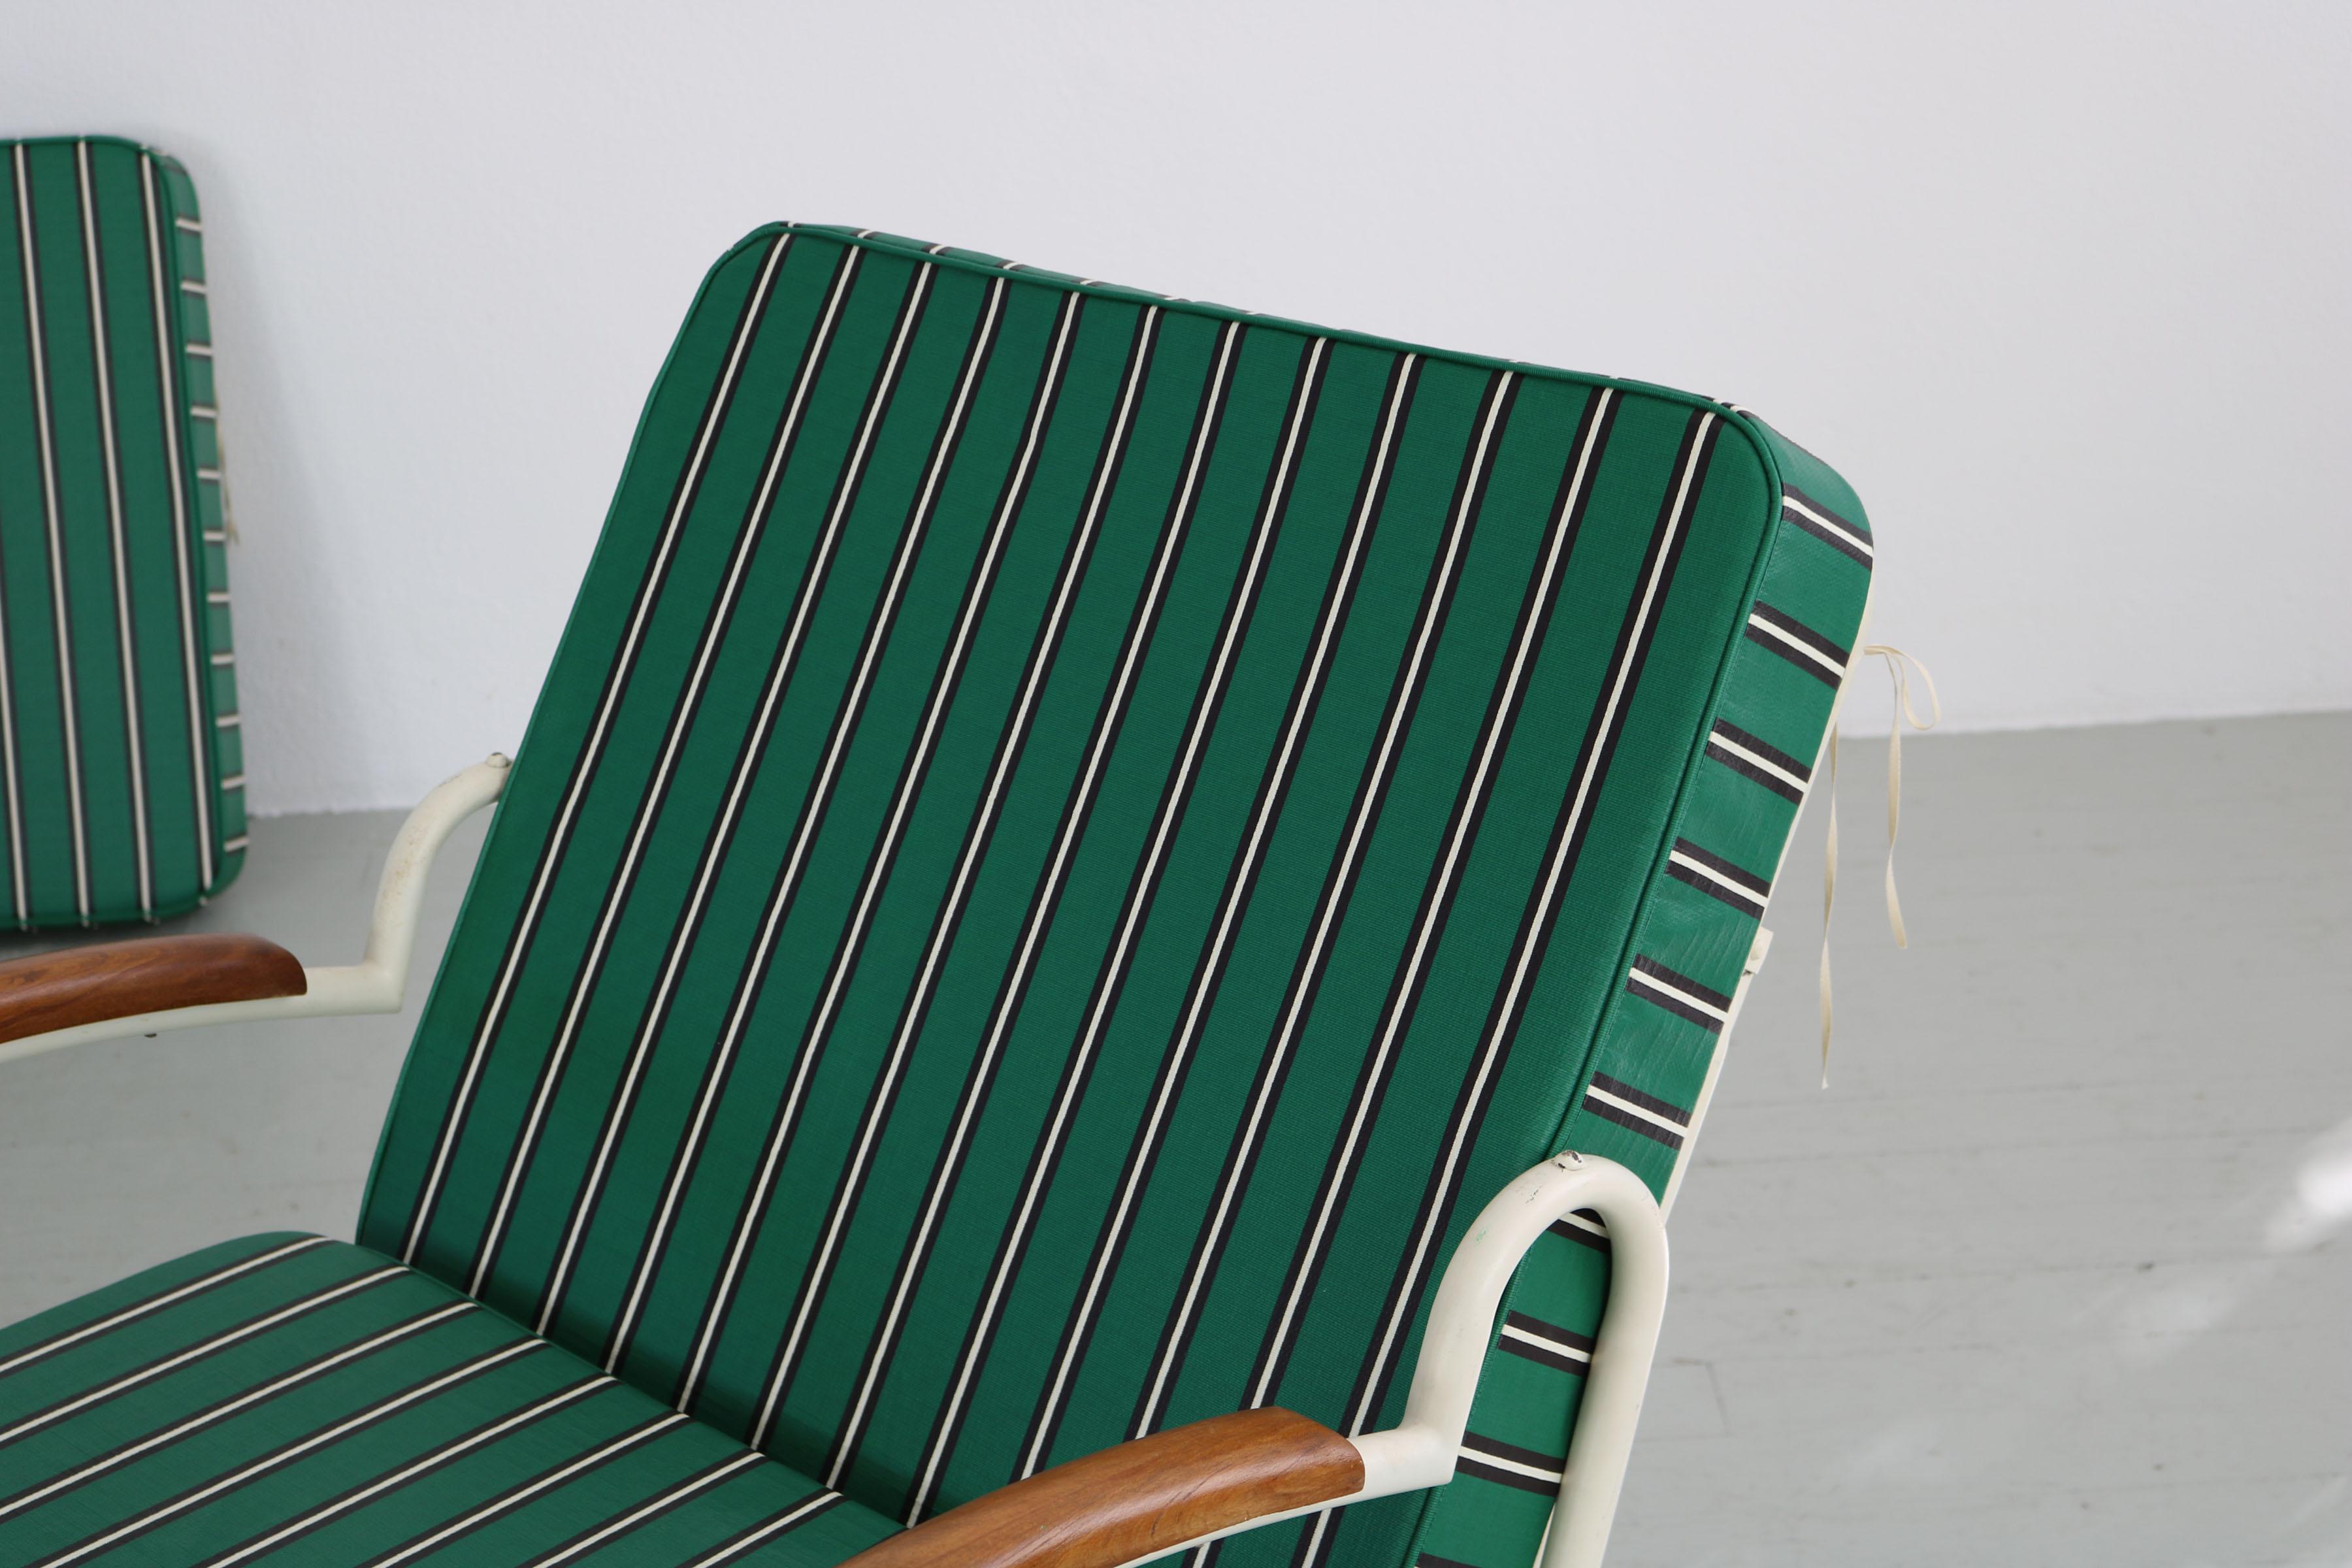 Bauhaus Folding Chair, Daybed, Germany 1930s For Sale 7